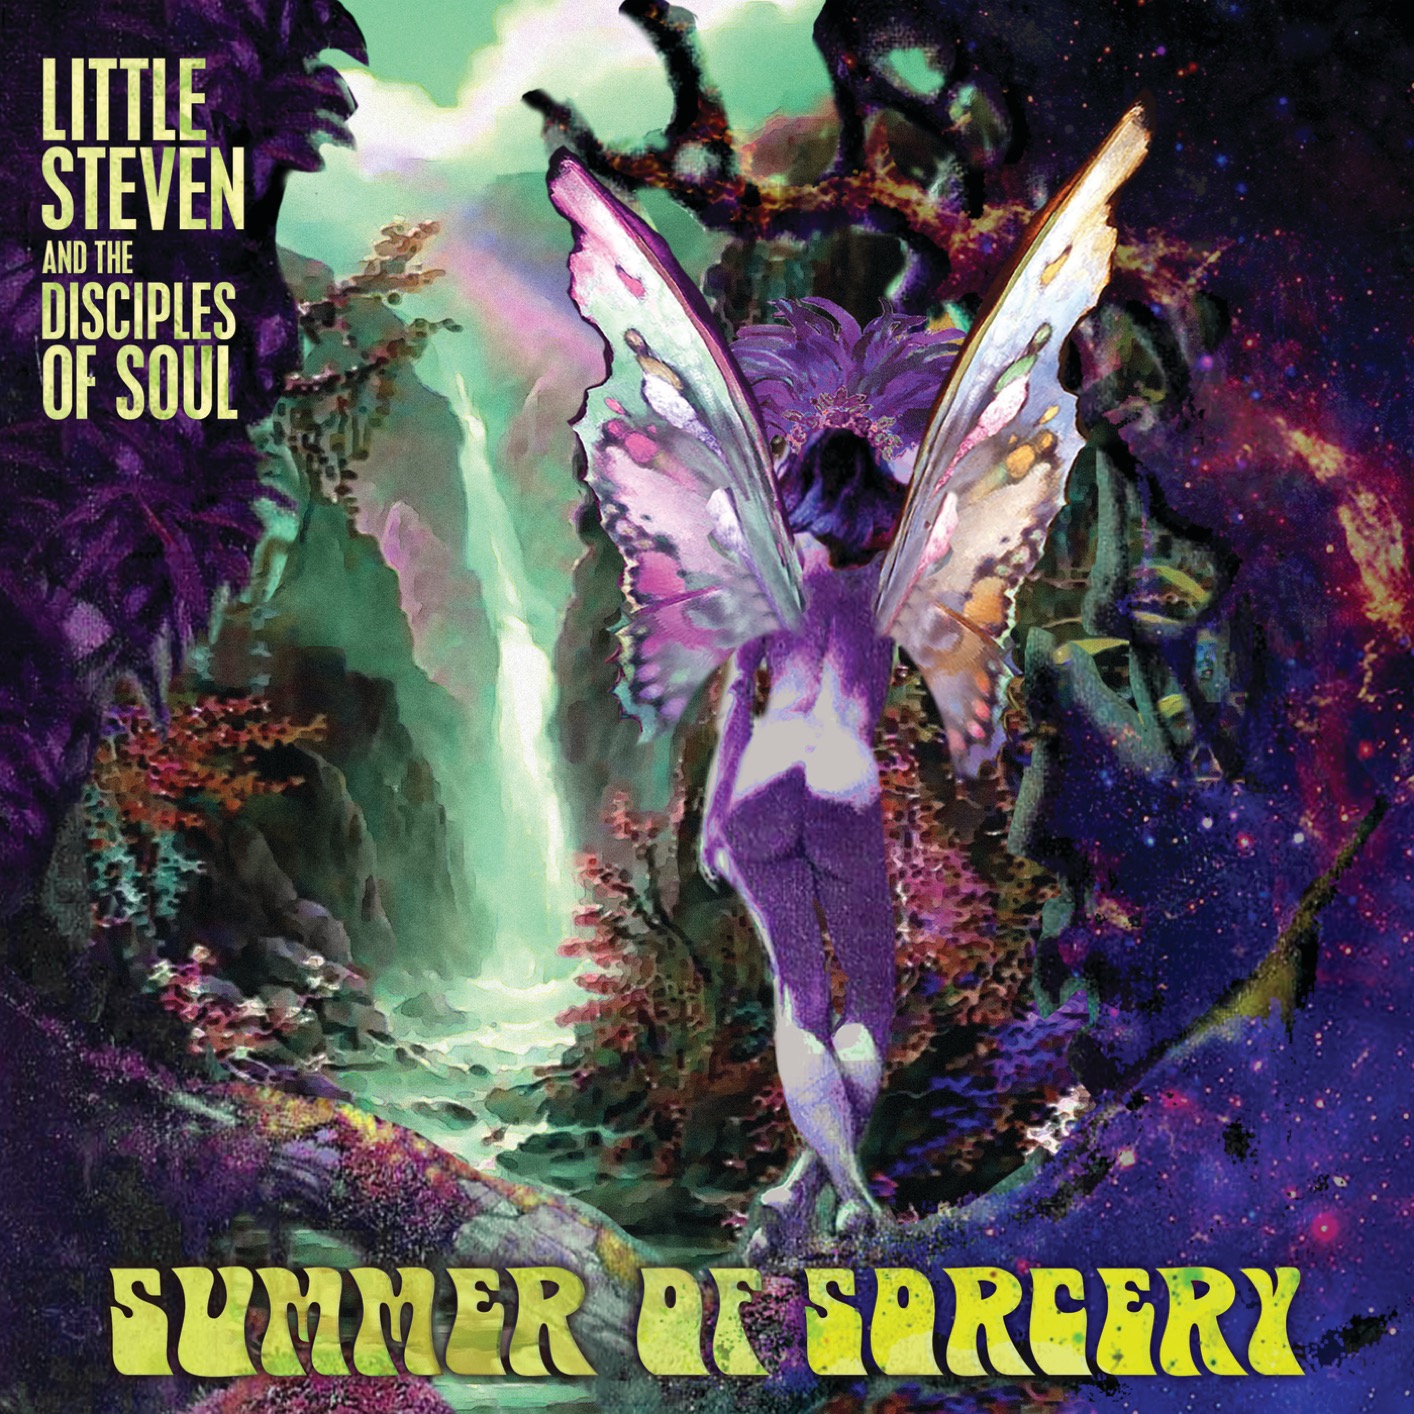 Little Steven and The Disciples of Soul – Summer Of Sorcery (2019) [FLAC 24bit/96kHz]